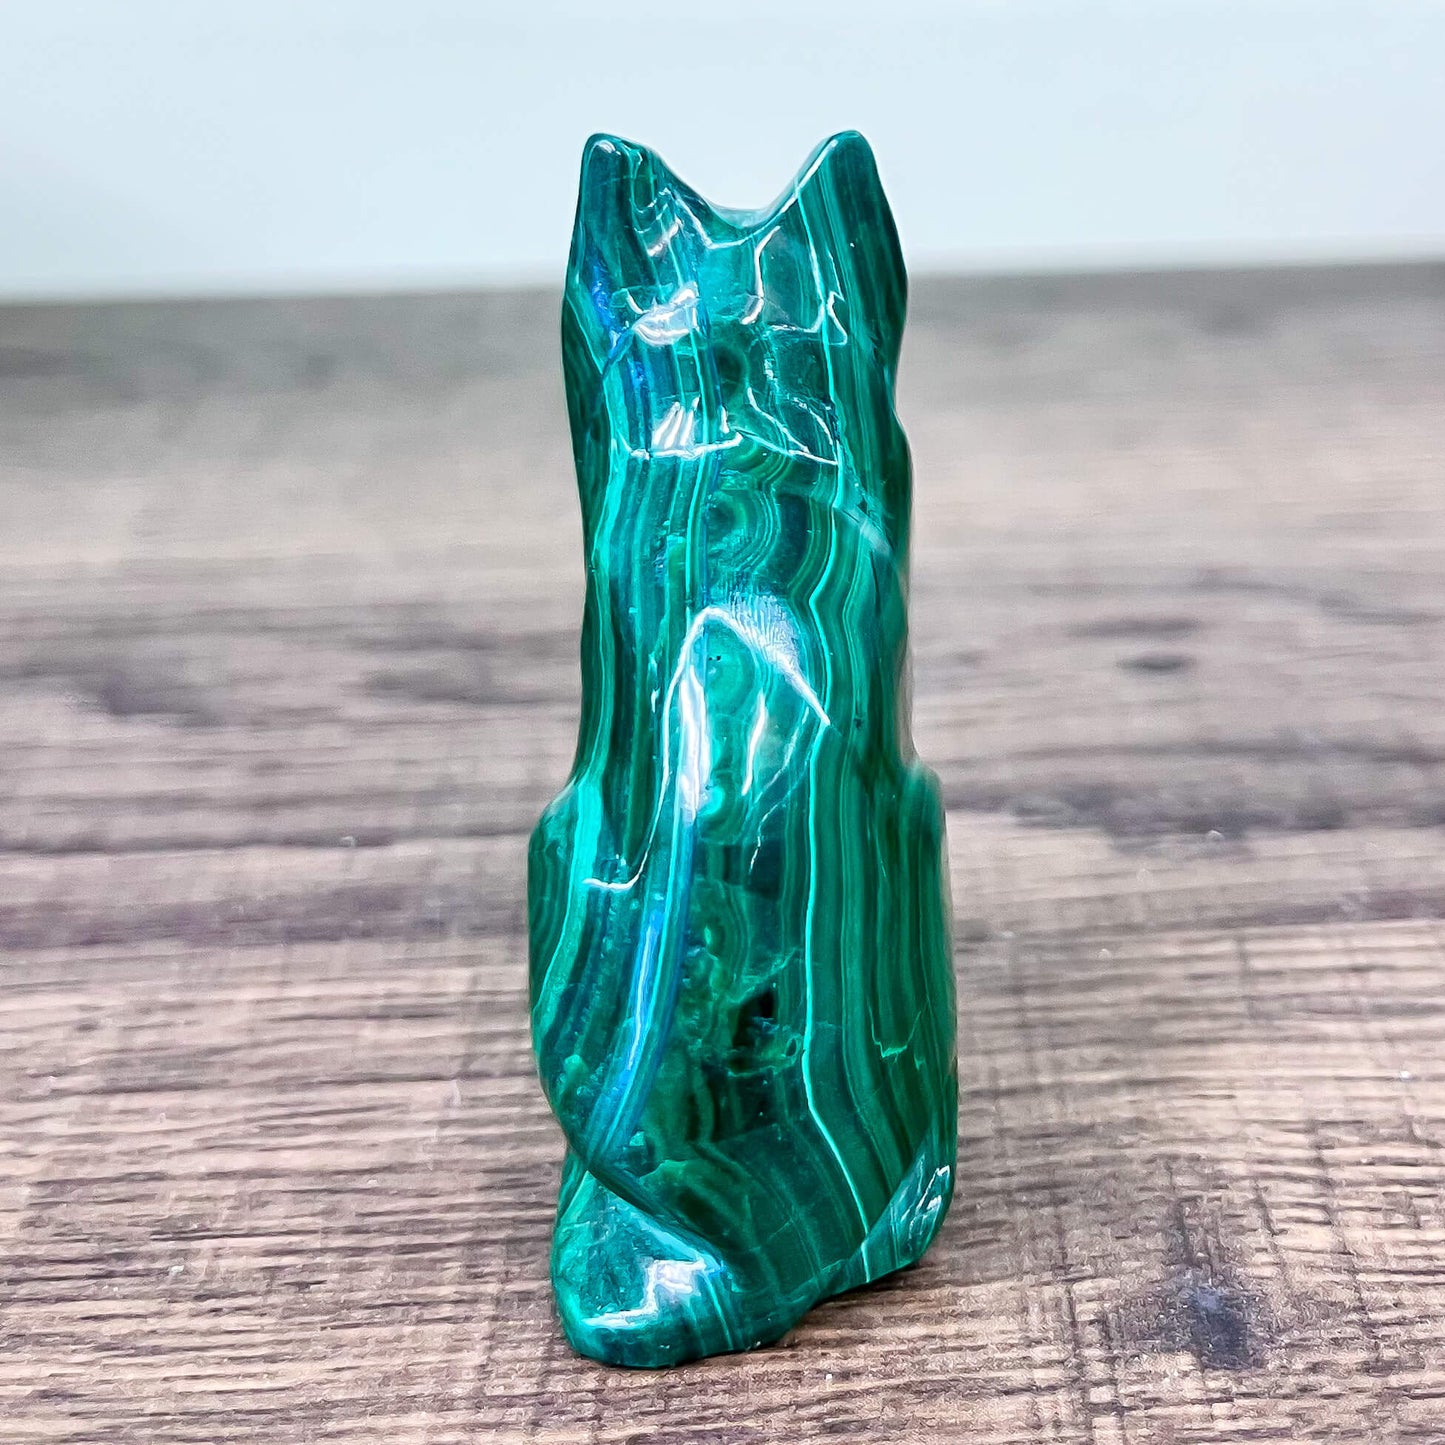 Genuine Malachite. Shop at Magic Crystals for Small Genuine Malachite Cat - Natural Malachite Cat Carving from Congo. Malachite Animal, Gifts for Her, Gifts for Him, Crystal Gemstones, Home Decor. FREE SHIPPING AVAILABLE. Hand Carved Malachite Stone Cat, Home Decor, Crystal Healing, Mineral Specimen #1.